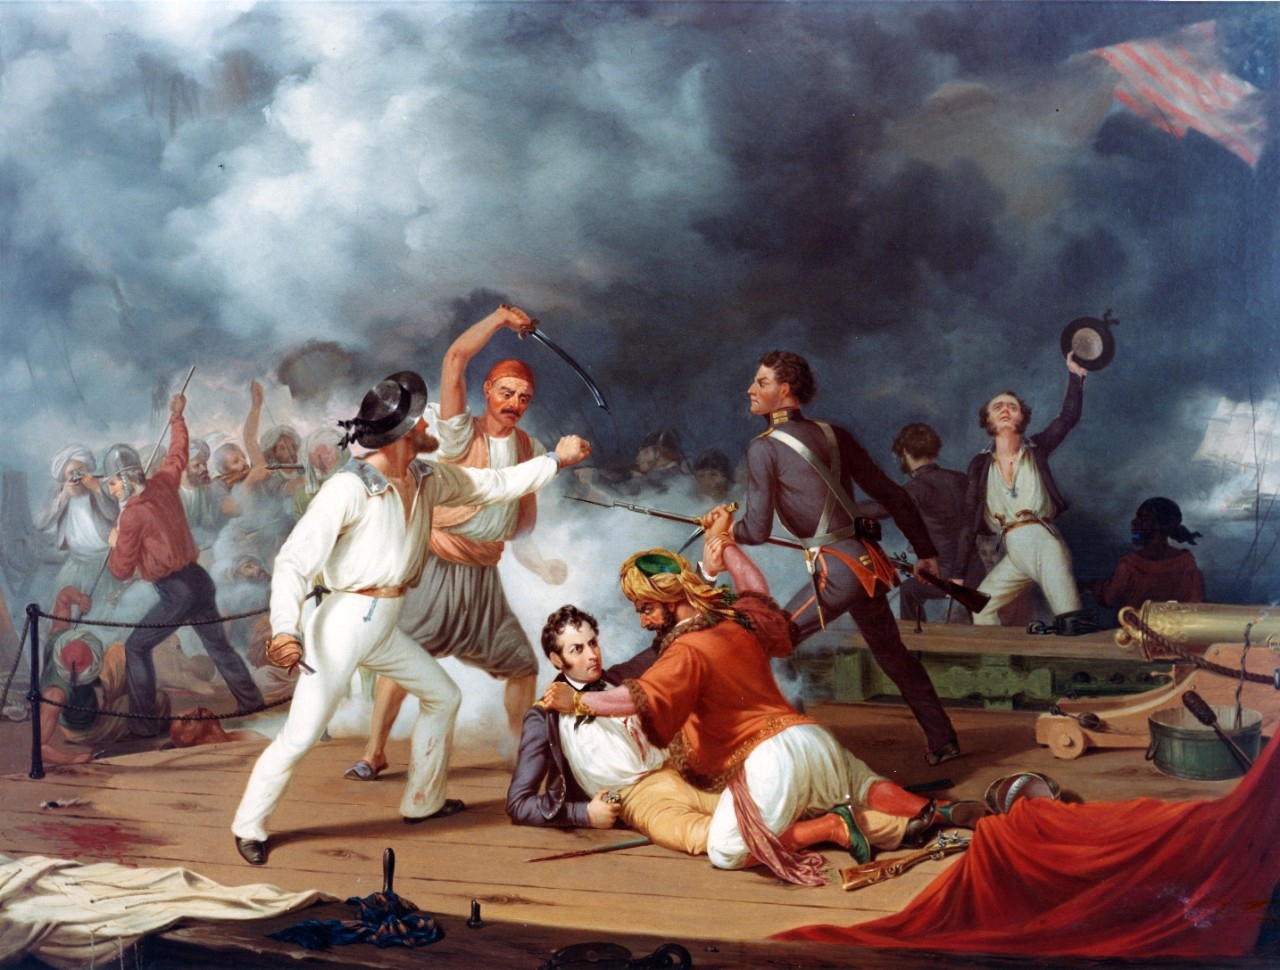 "Stephen Decatur's Conflict with the Algerine at Tripoli" during the boarding of a Tripolitan gunboat on 3 August 1804. Oil over print on canvas, 30” x 25”, by an unidentified artist, after Alonzo Chappell (1829-1887). Painting in the U.S. Naval ...